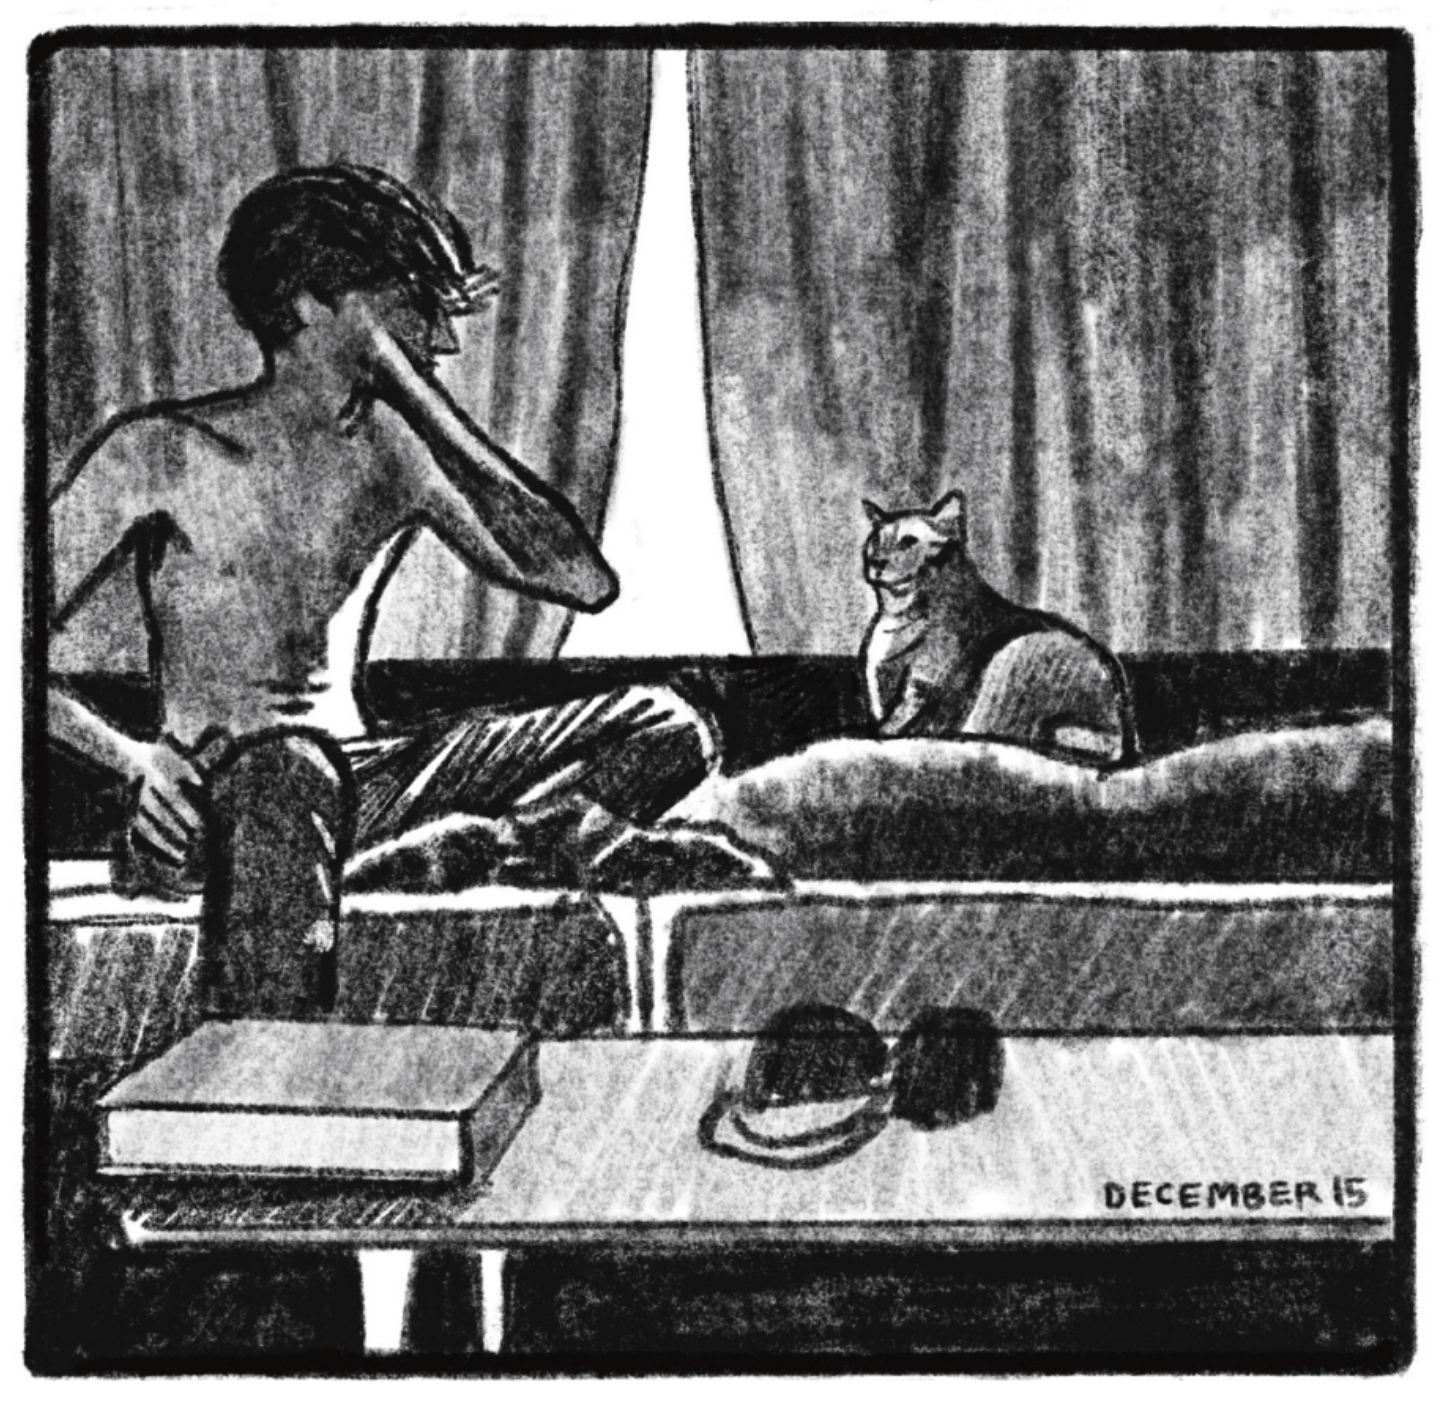 Enzo is sitting up shirtless on the couch, or a bench, in front of a window, looking at a cat to his left. The curtains are mostly closed except for a wedge of light coming through. A book and a pair of headphones are sitting on a coffee table in the foreground. â€œDecember 15.â€